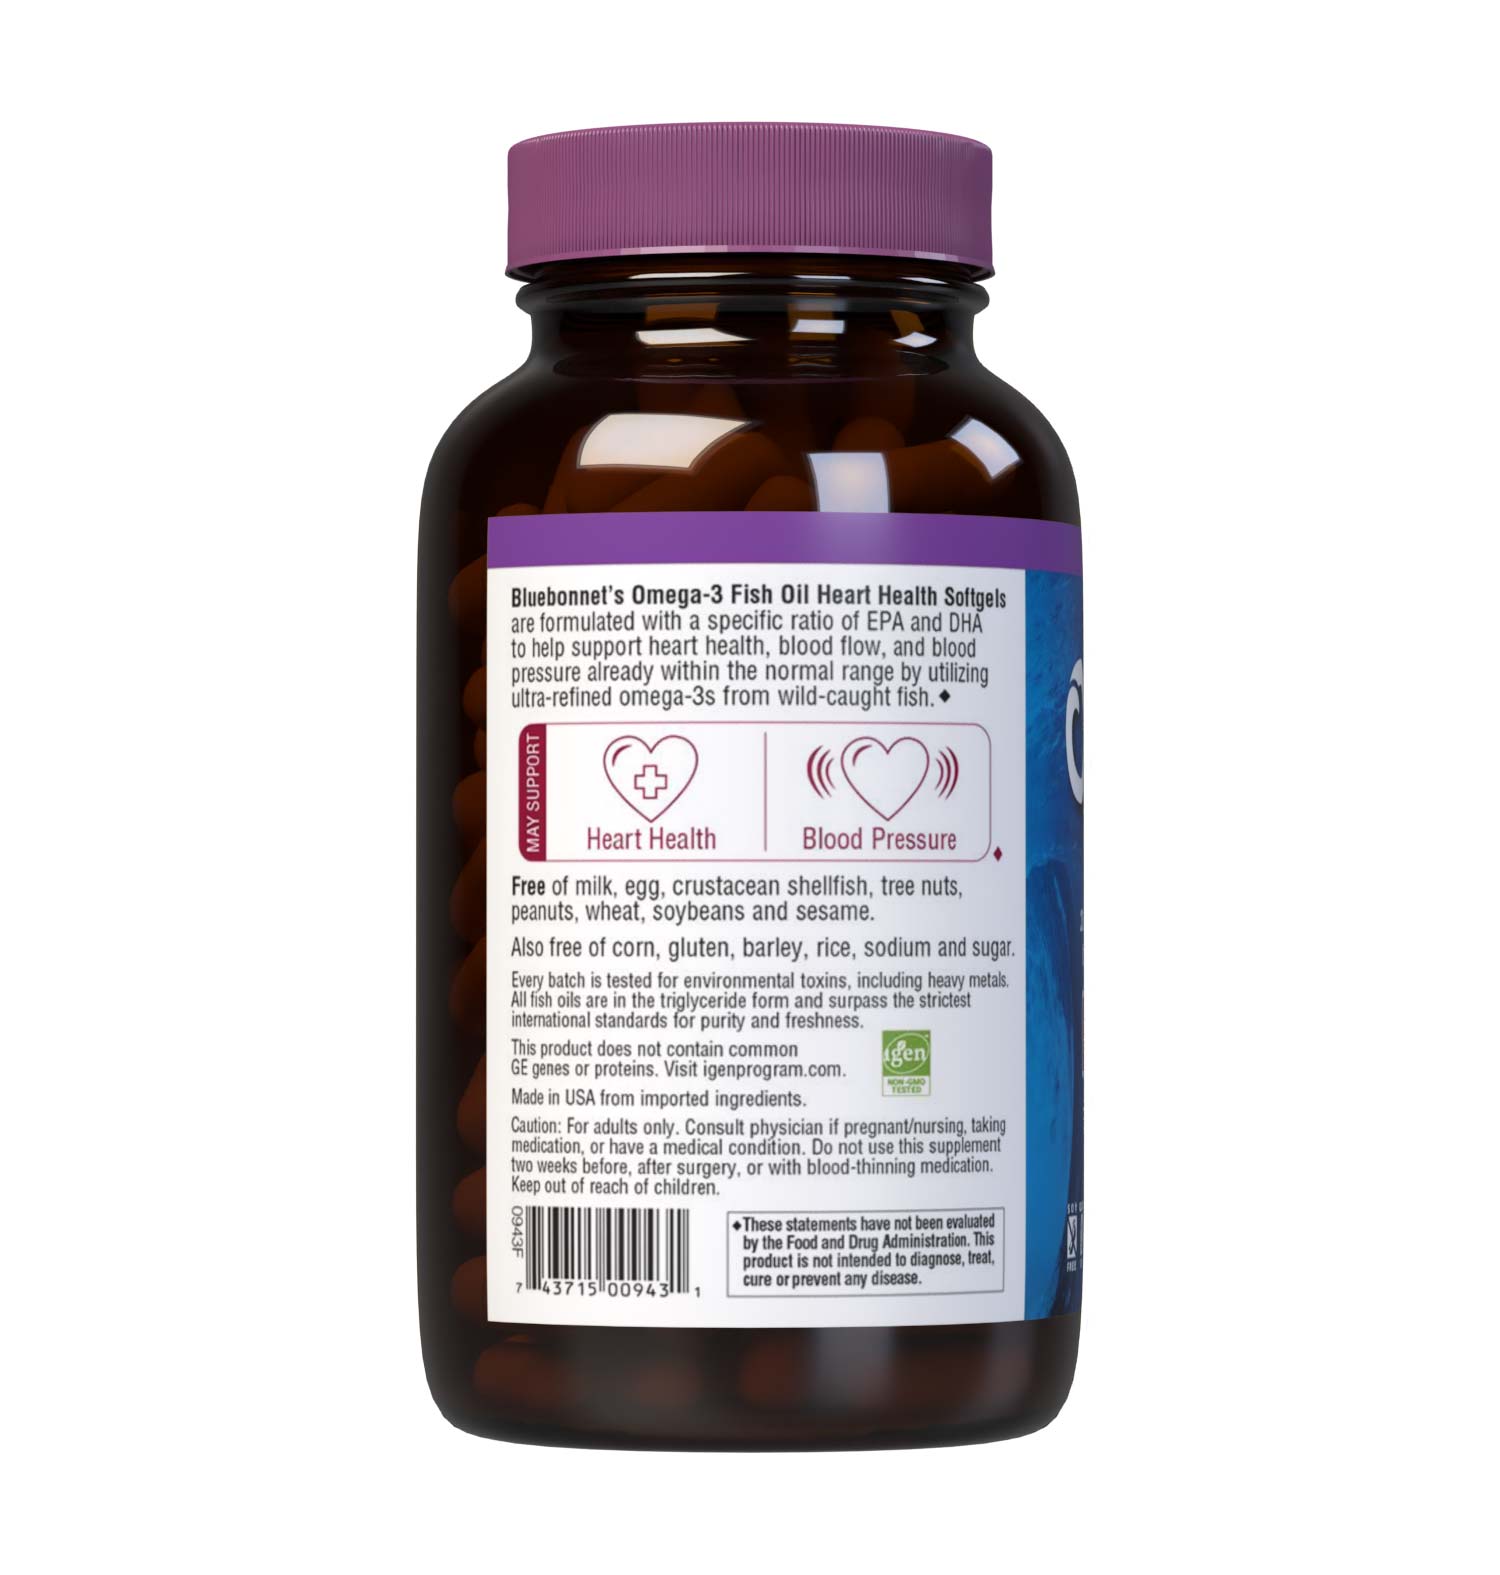 Bluebonnet’s Omega-3 Fish Oil Heart Health 120 Softgels are formulated with a specific ratio of EPA and DHA to help support heart function, blood flow, and blood pressure within the normal range by utilizing ultra-refined omega-3s from wild-caught fish. Description panel. #size_120 count